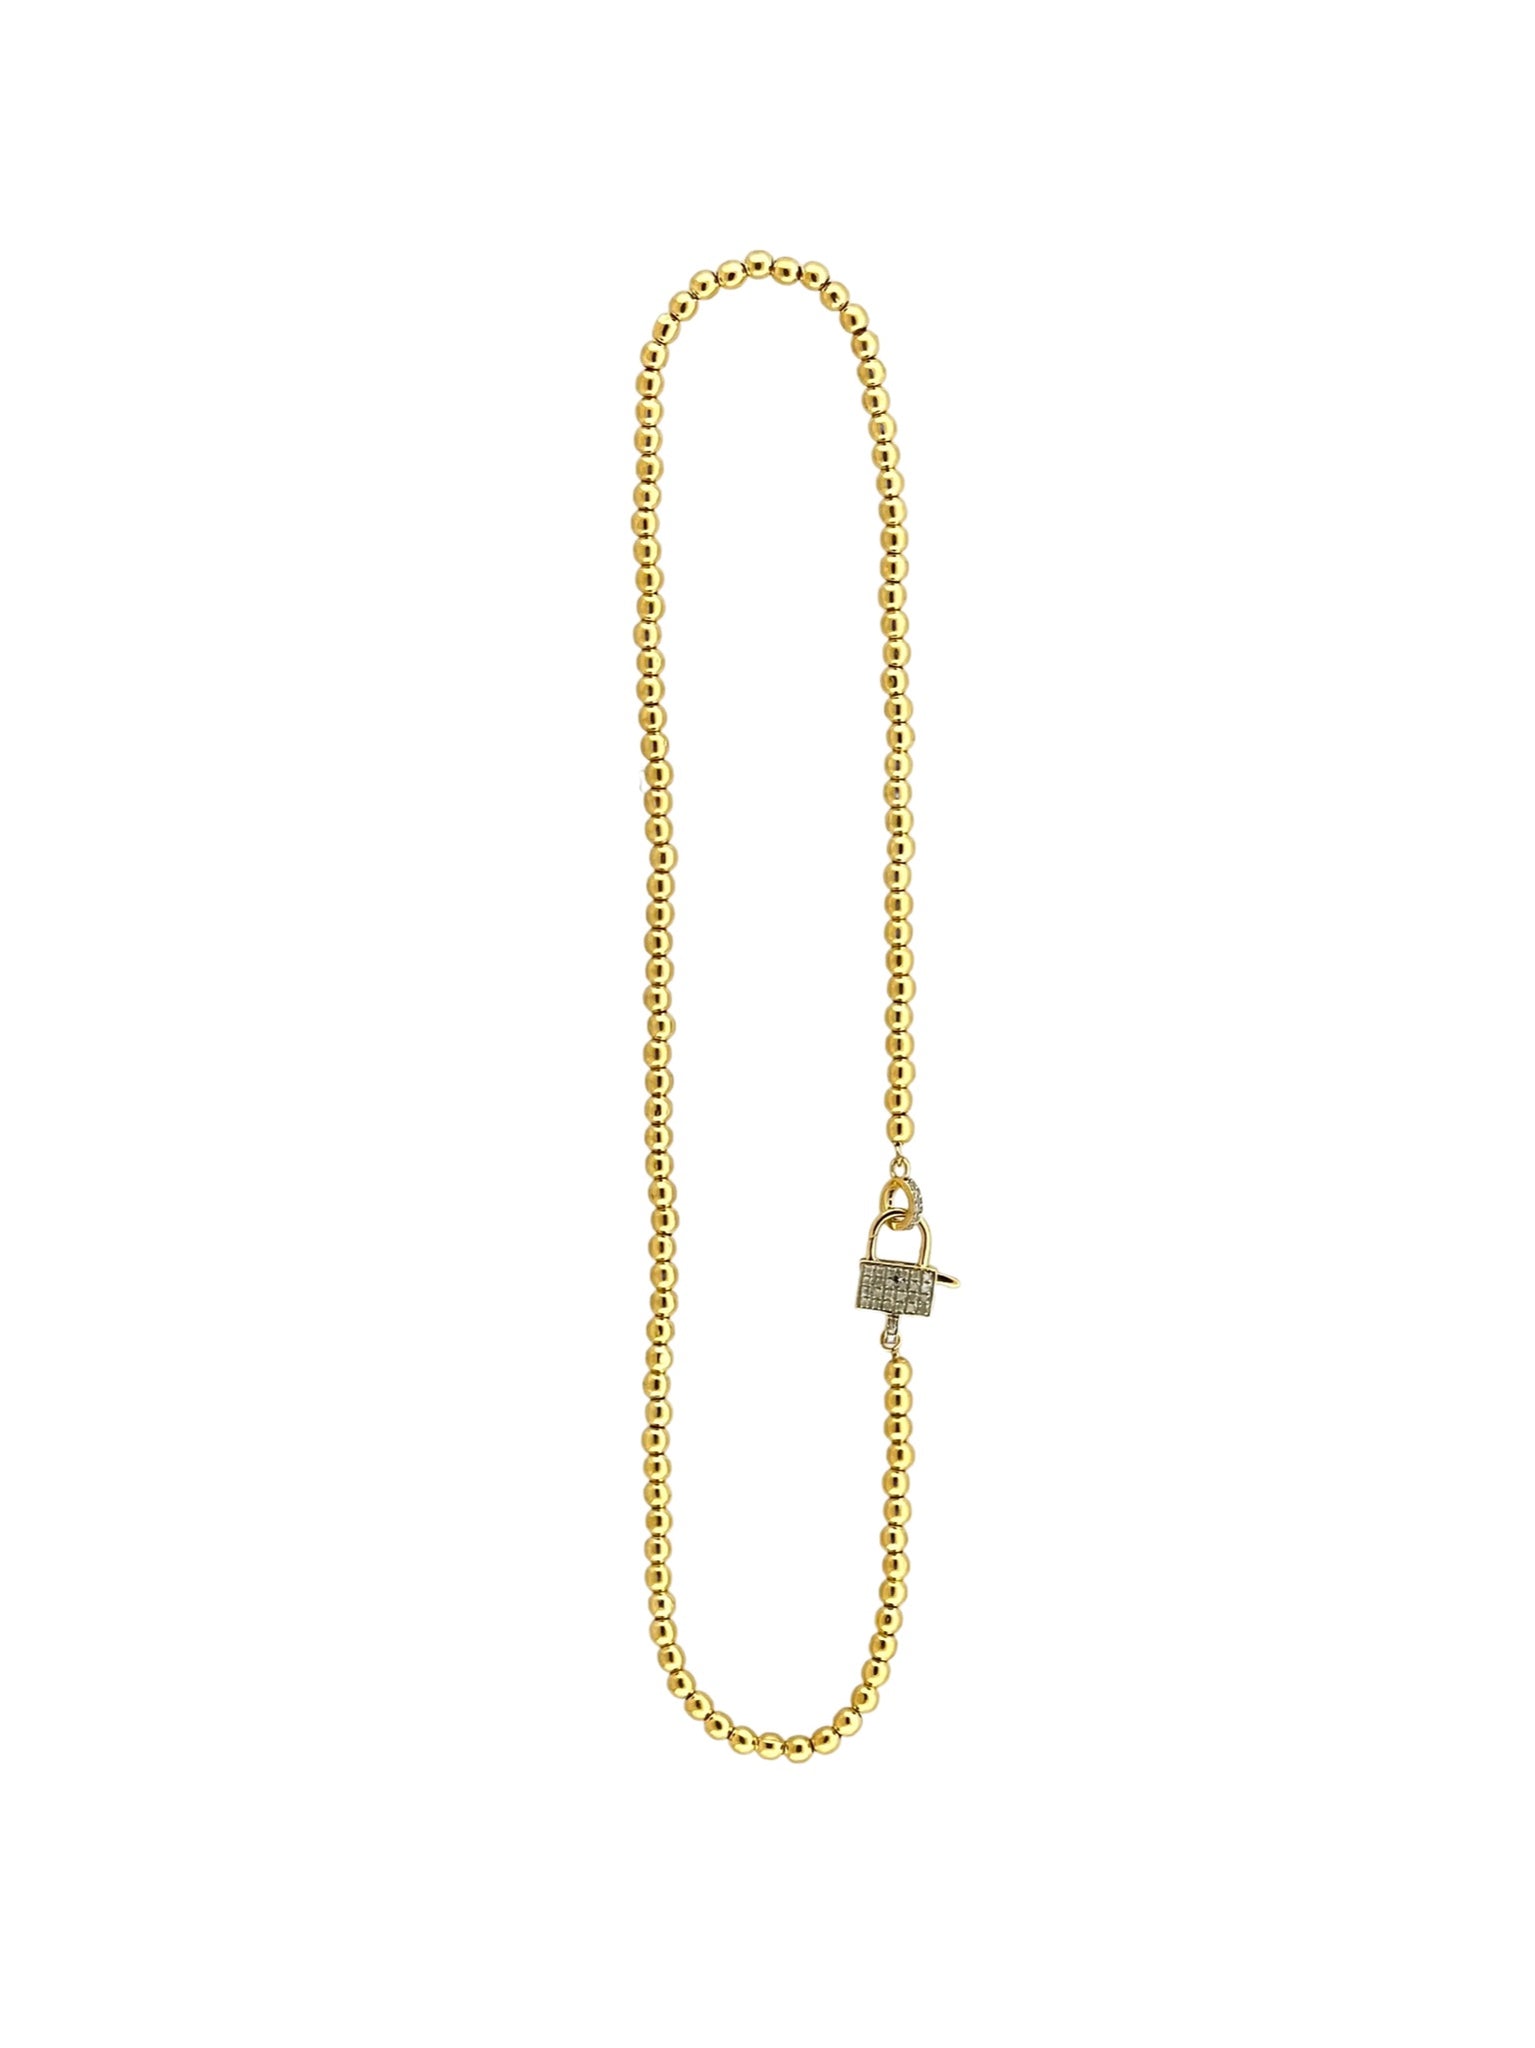 Ball Chain with Pave Diamond Clasp in 22kt Gold over Brass- 17"